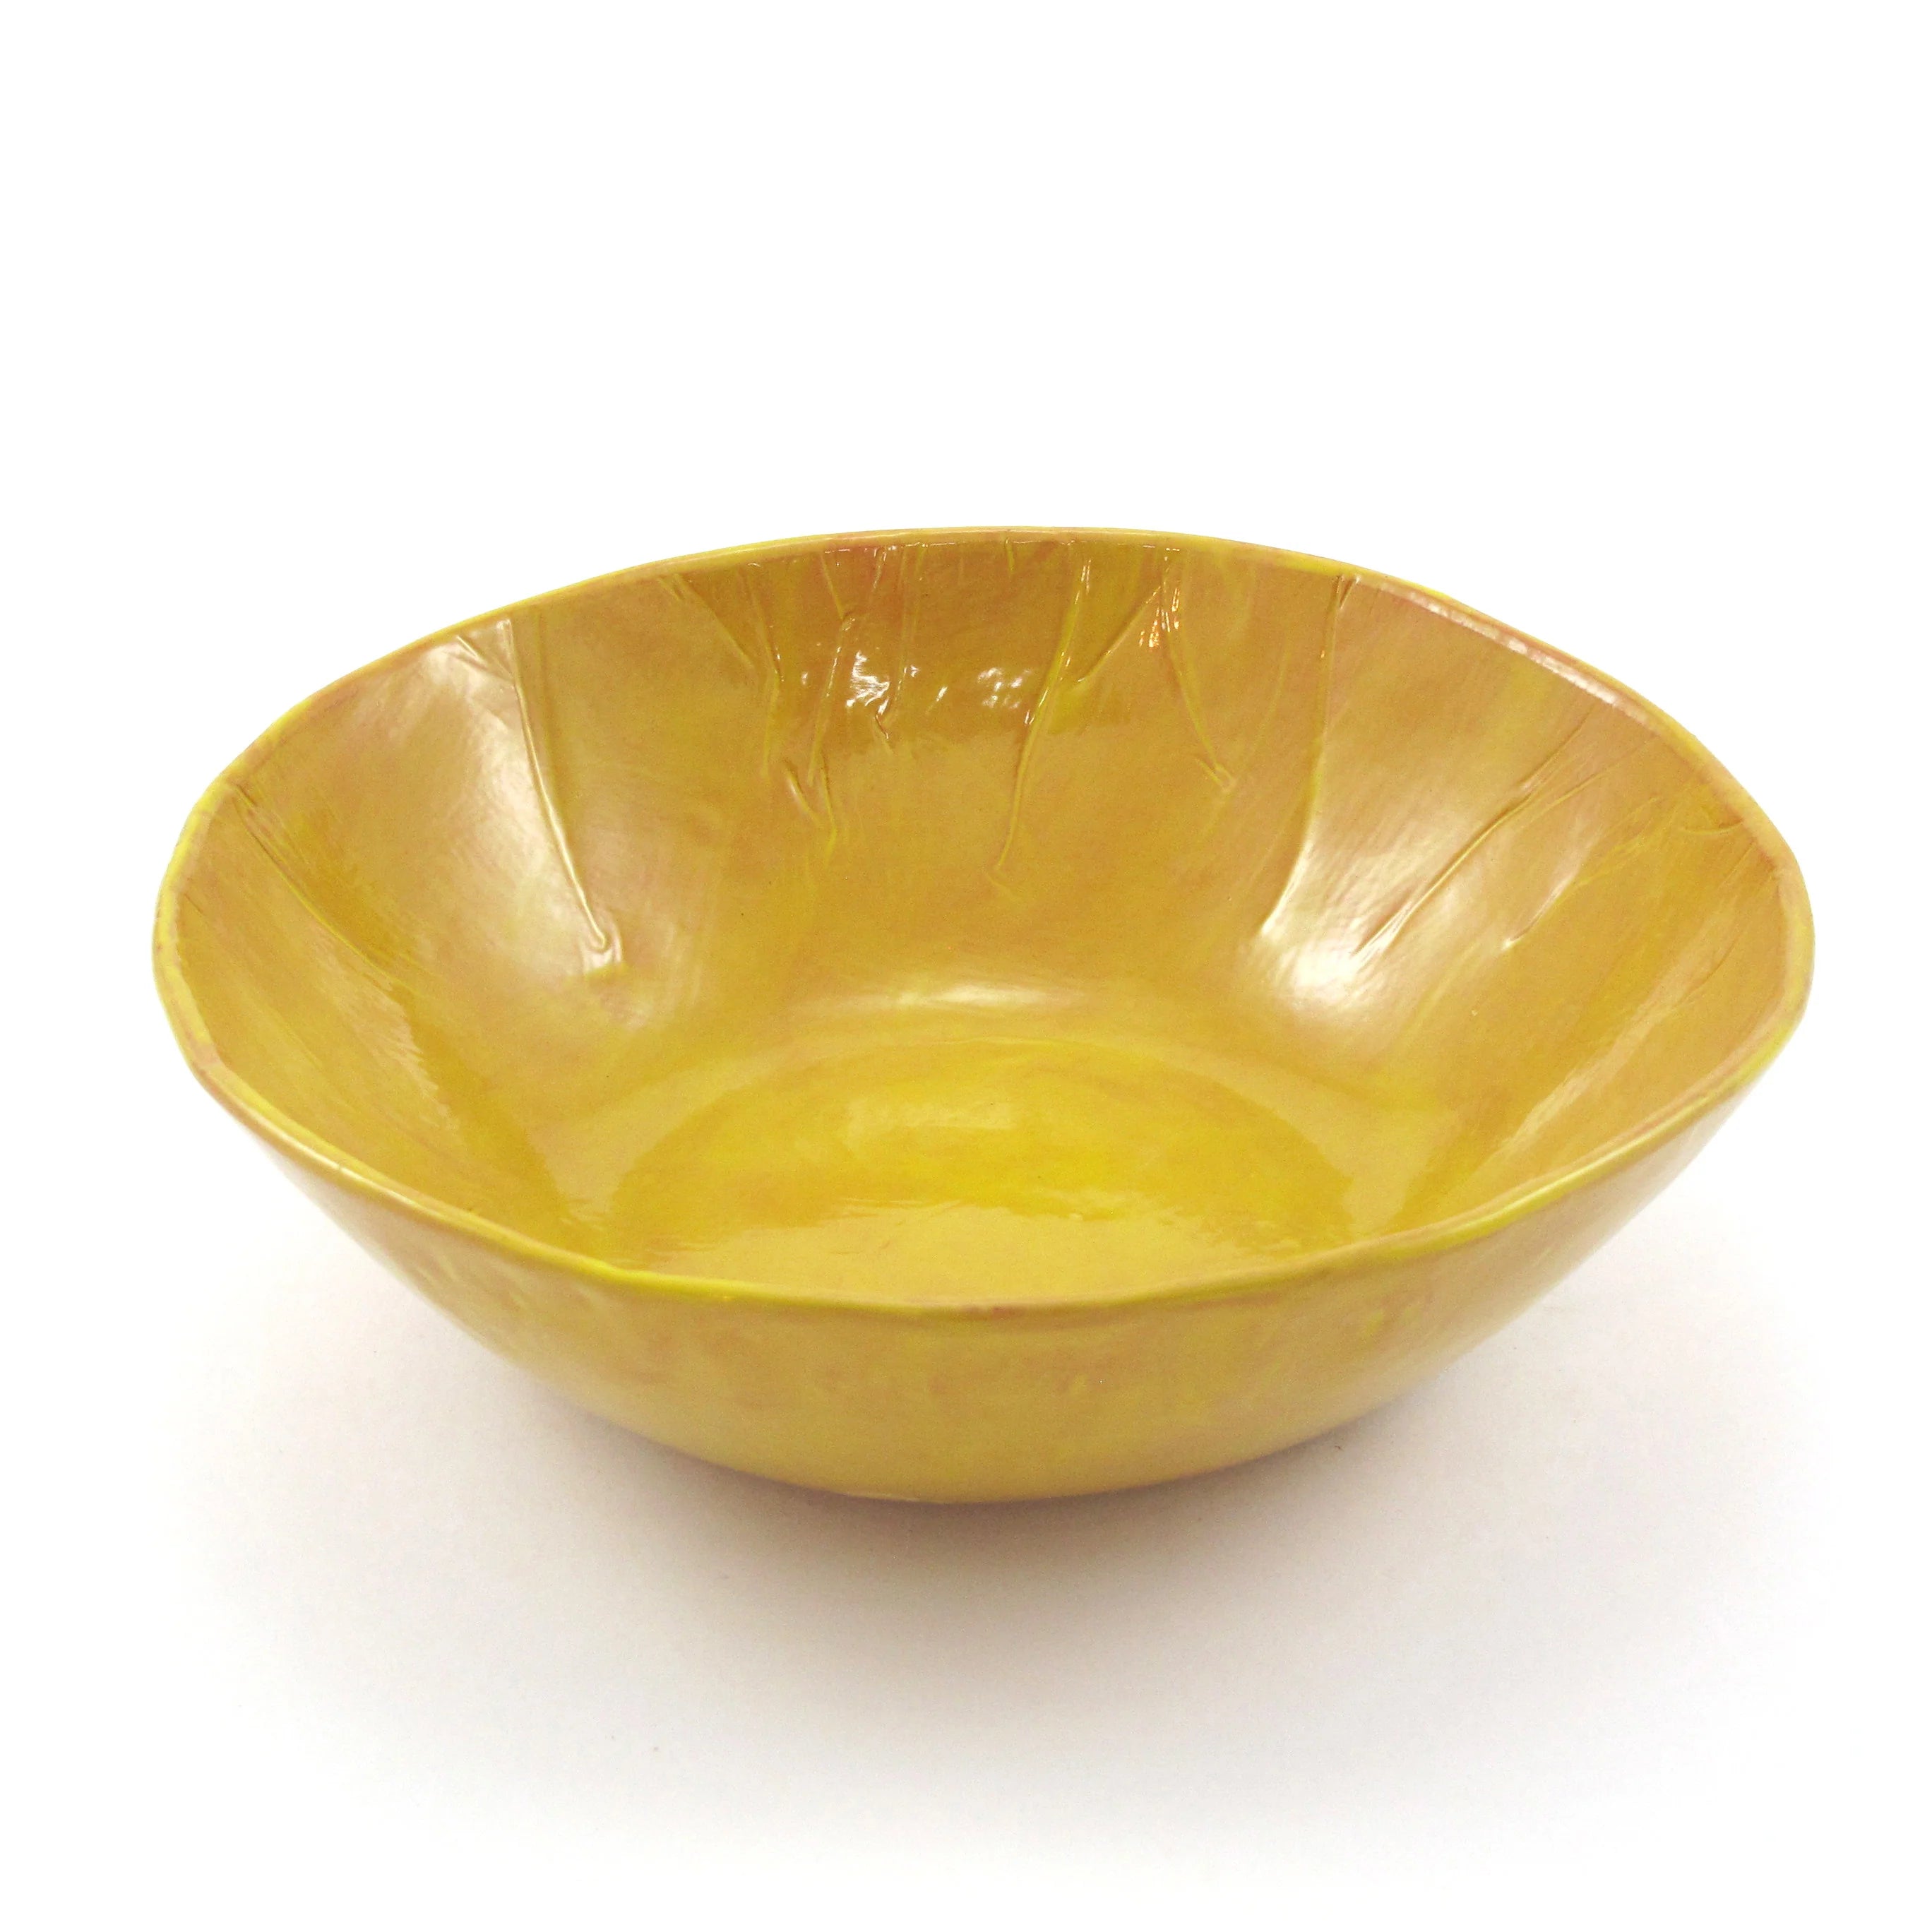 Large Everything Bowl | First quality